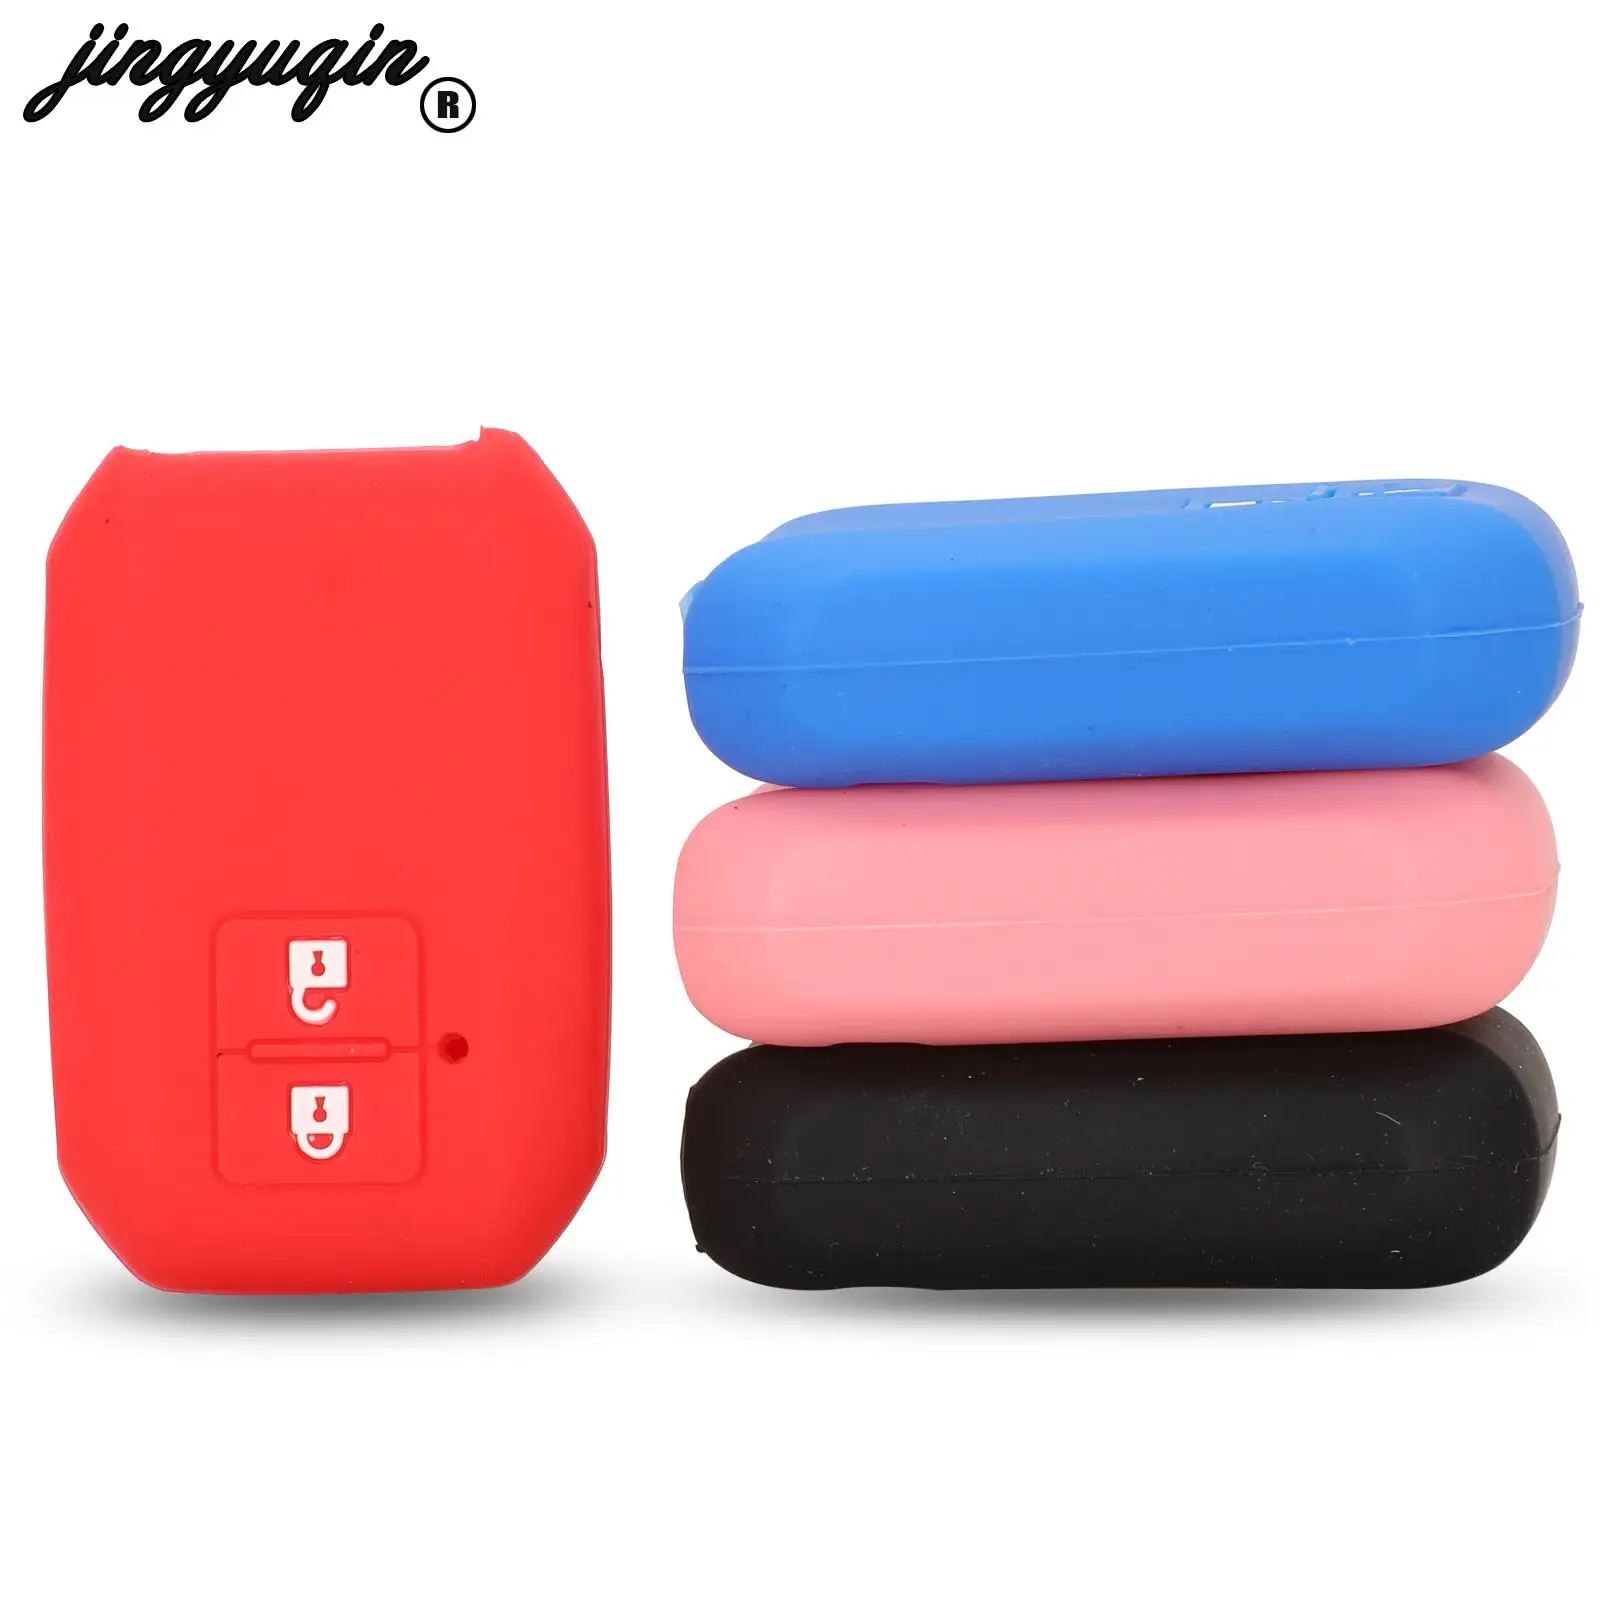 jingyuqin 2 Buttons Silicone Remote Car Key Case Cover Protect FOB For Suzuki Swift 2017 2018 Holder